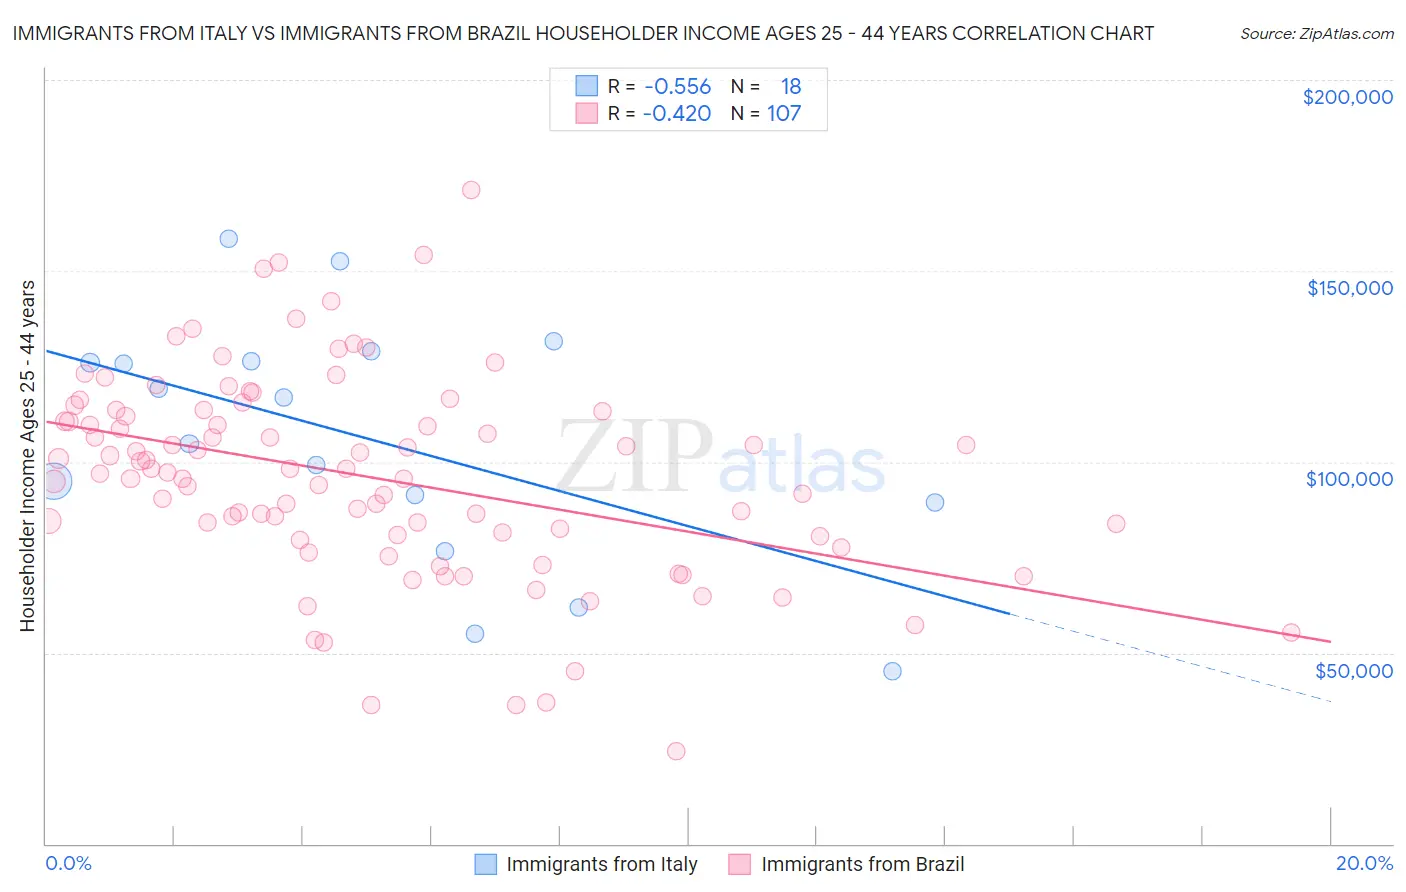 Immigrants from Italy vs Immigrants from Brazil Householder Income Ages 25 - 44 years